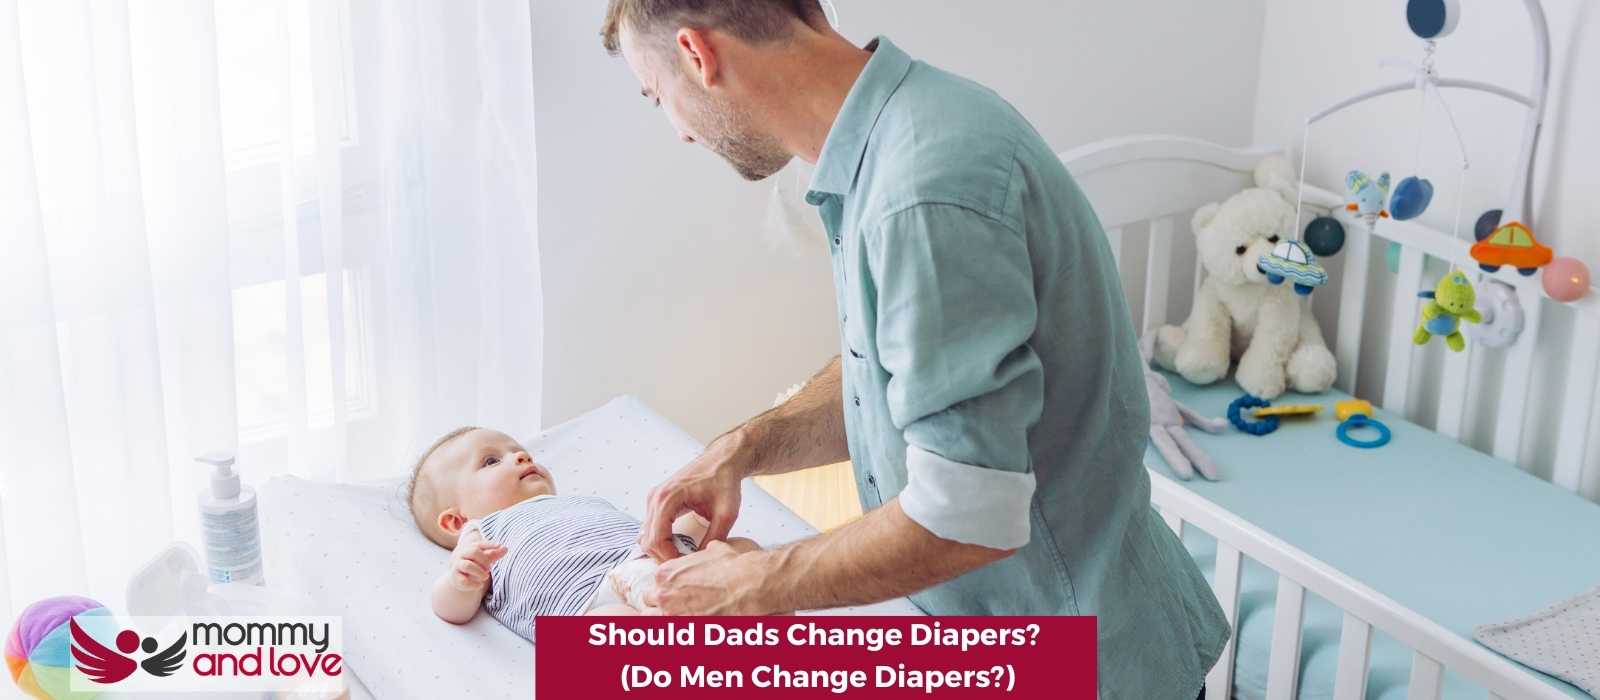 Should Dads Change Diapers (Do Men Change Diapers)